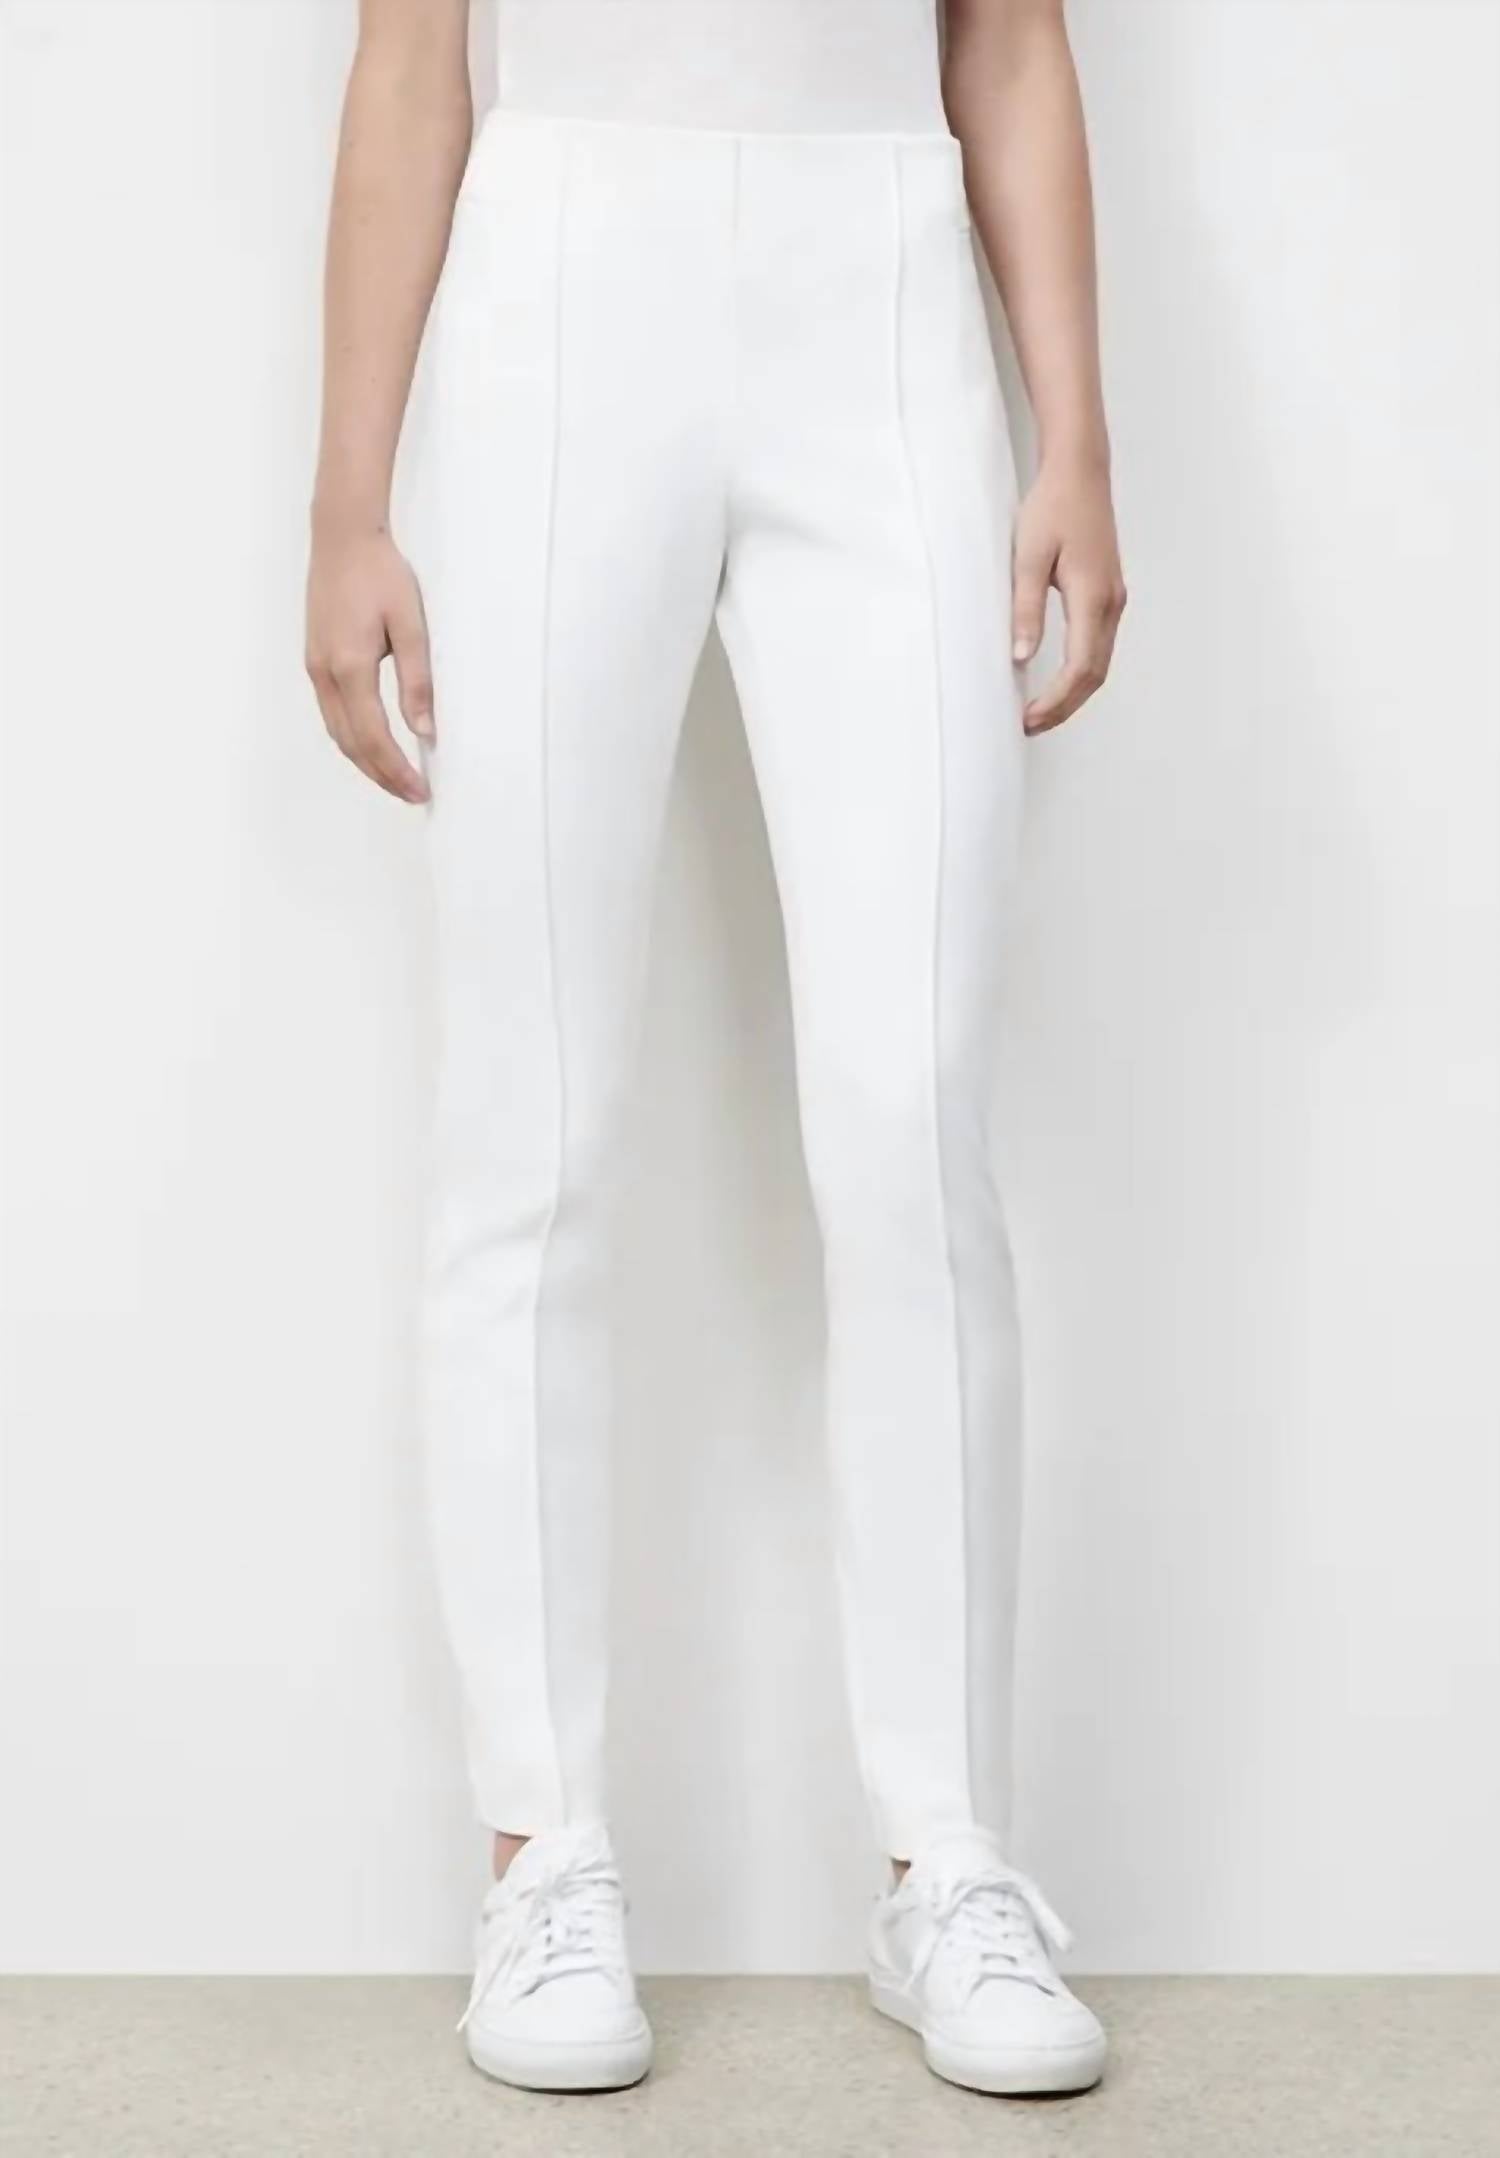 LAFAYETTE 148 Gramercy Pant in White